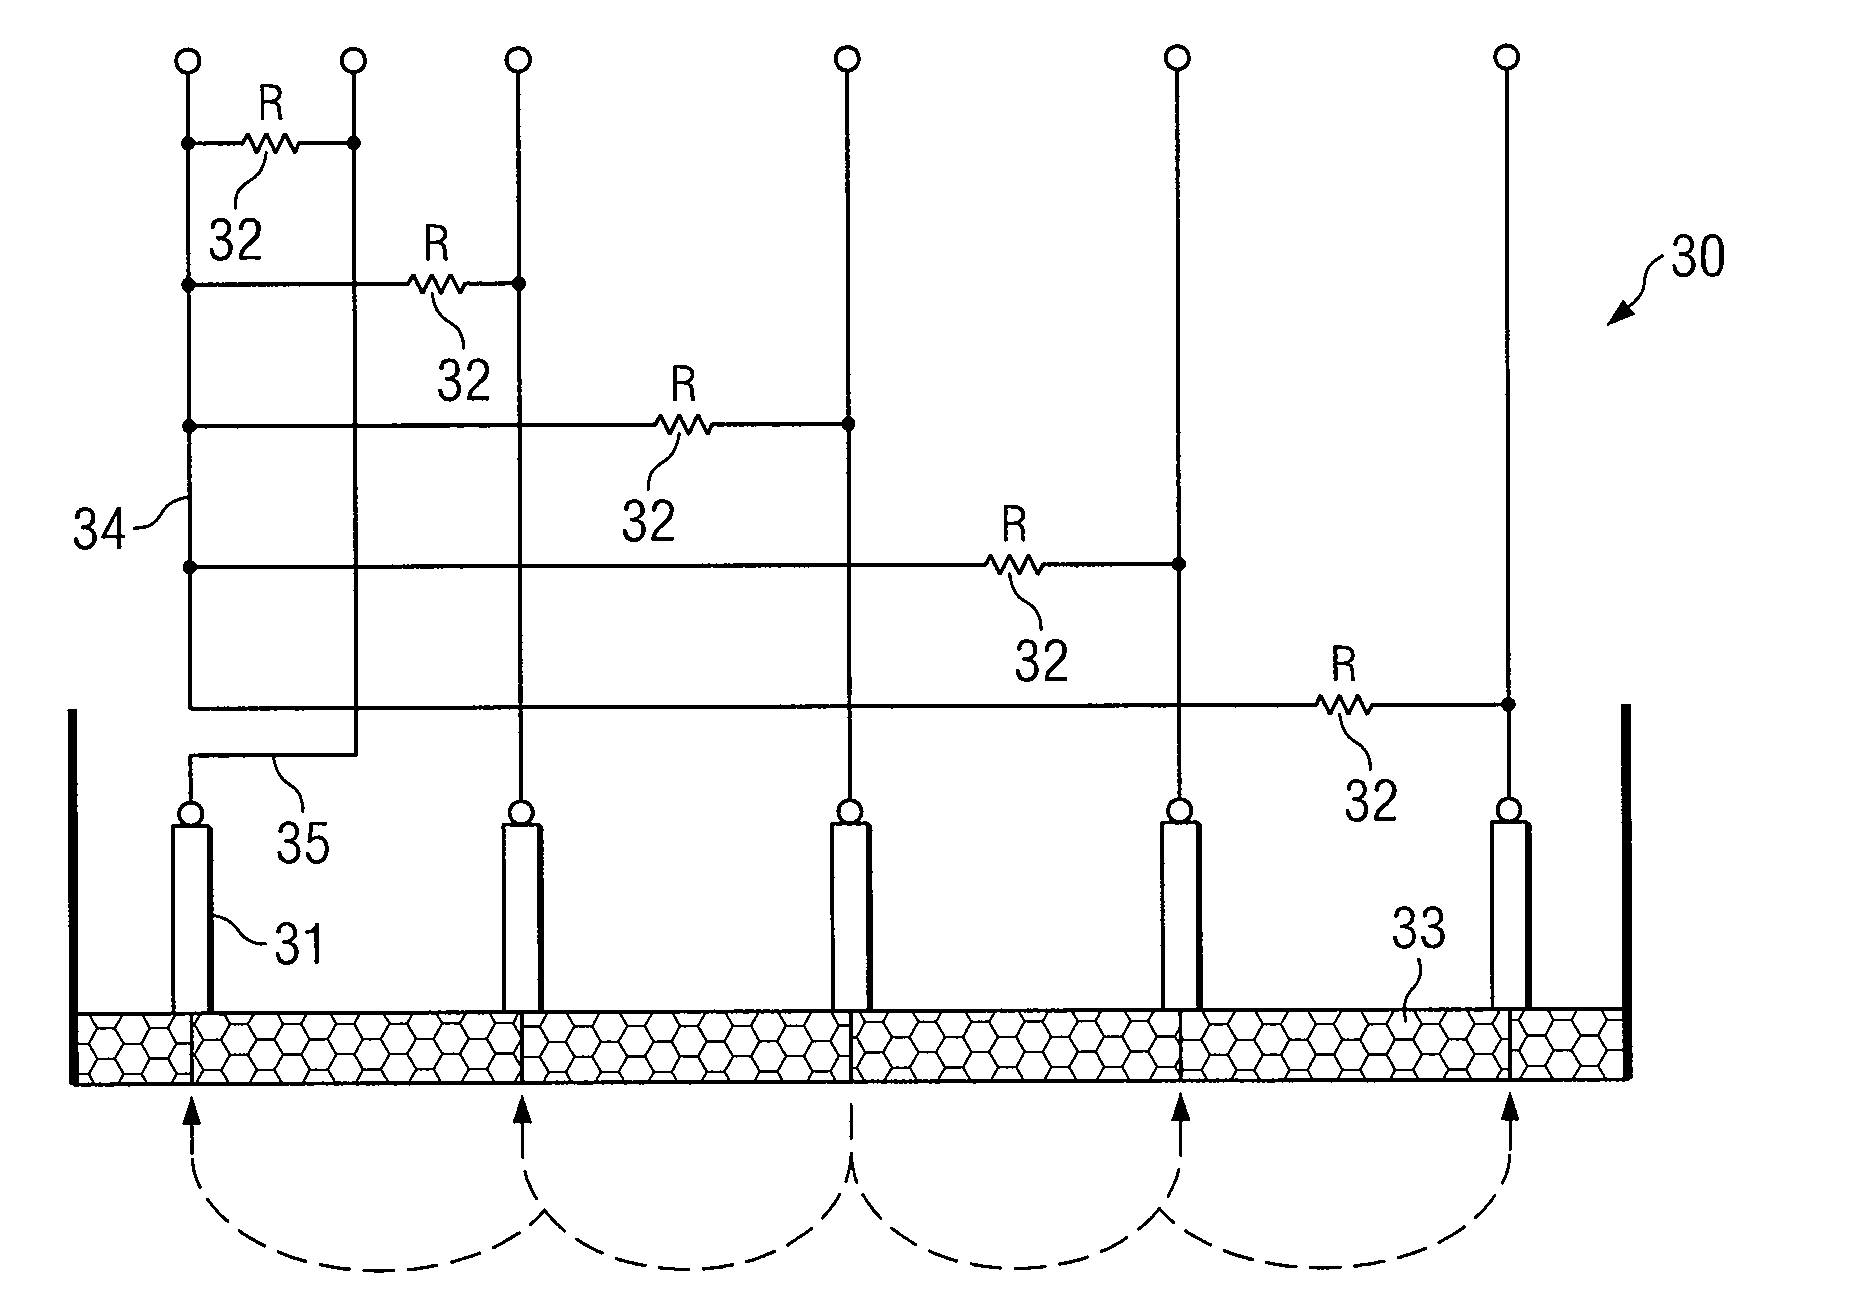 Method for measuring localized corrosion rate with a multi-electrode array sensor